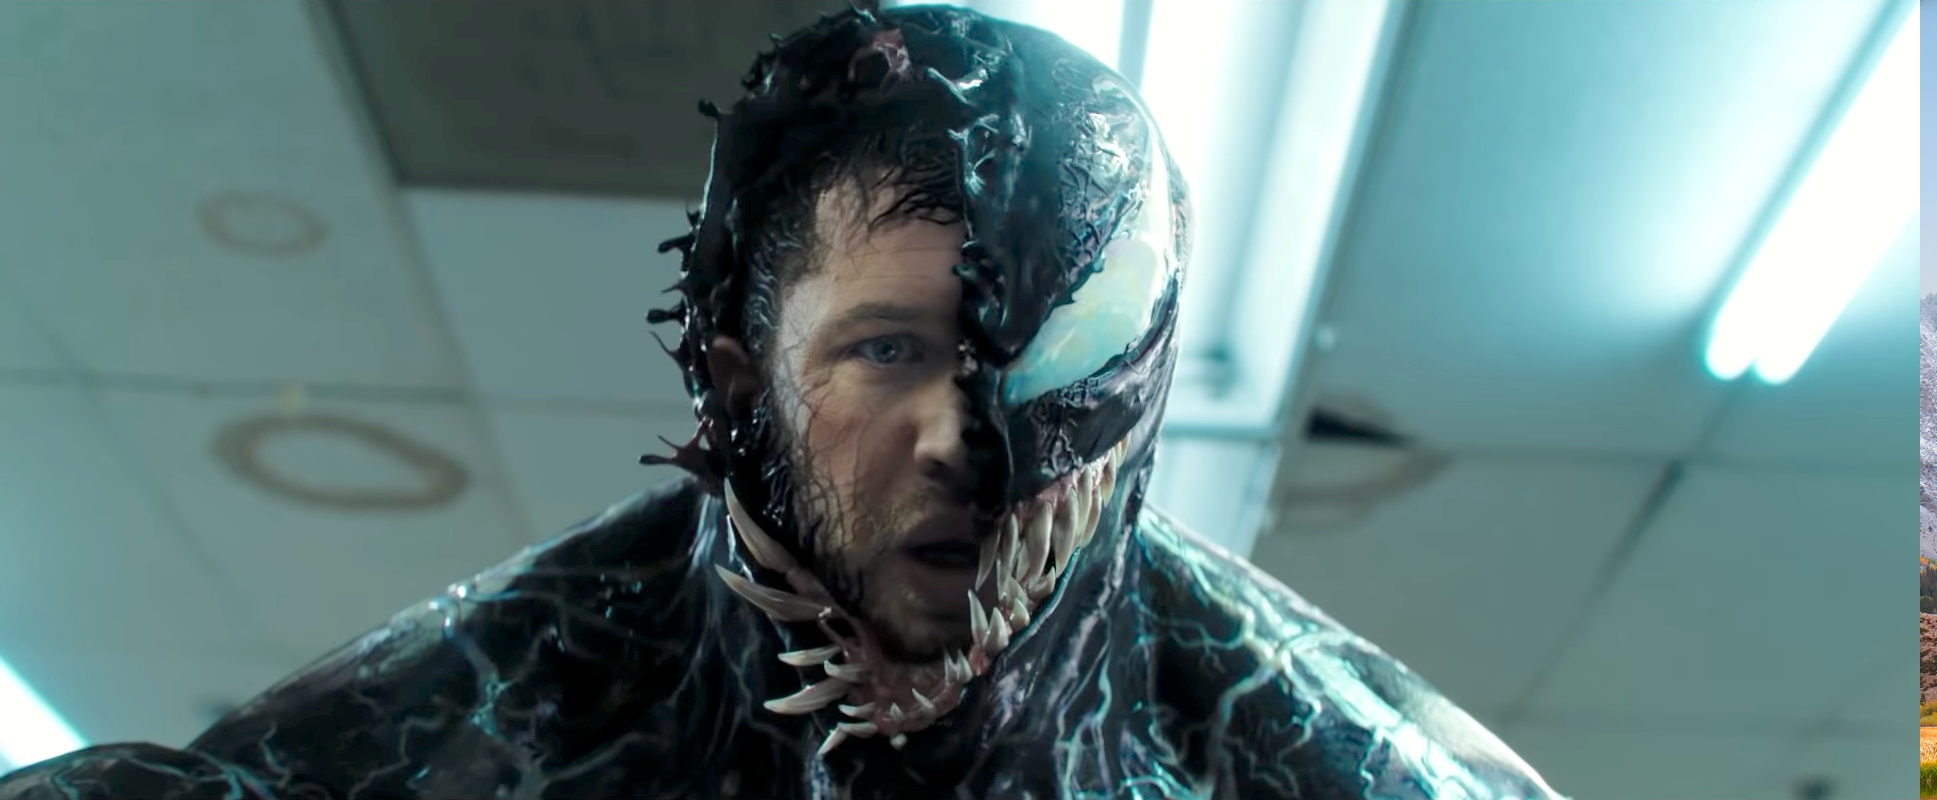 Venom 3 is now subtitled The Last Dance according to Variety, and one can hope it really is the last dance for this franchise.